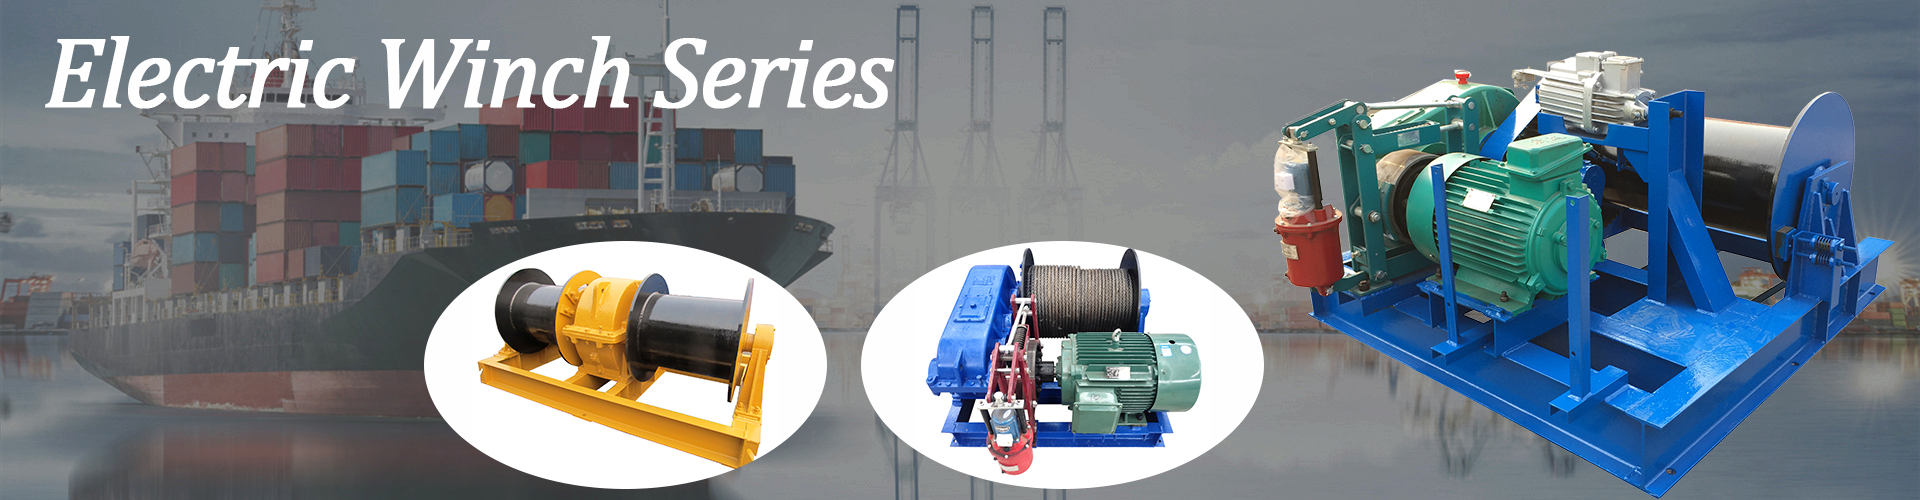 electric winch series